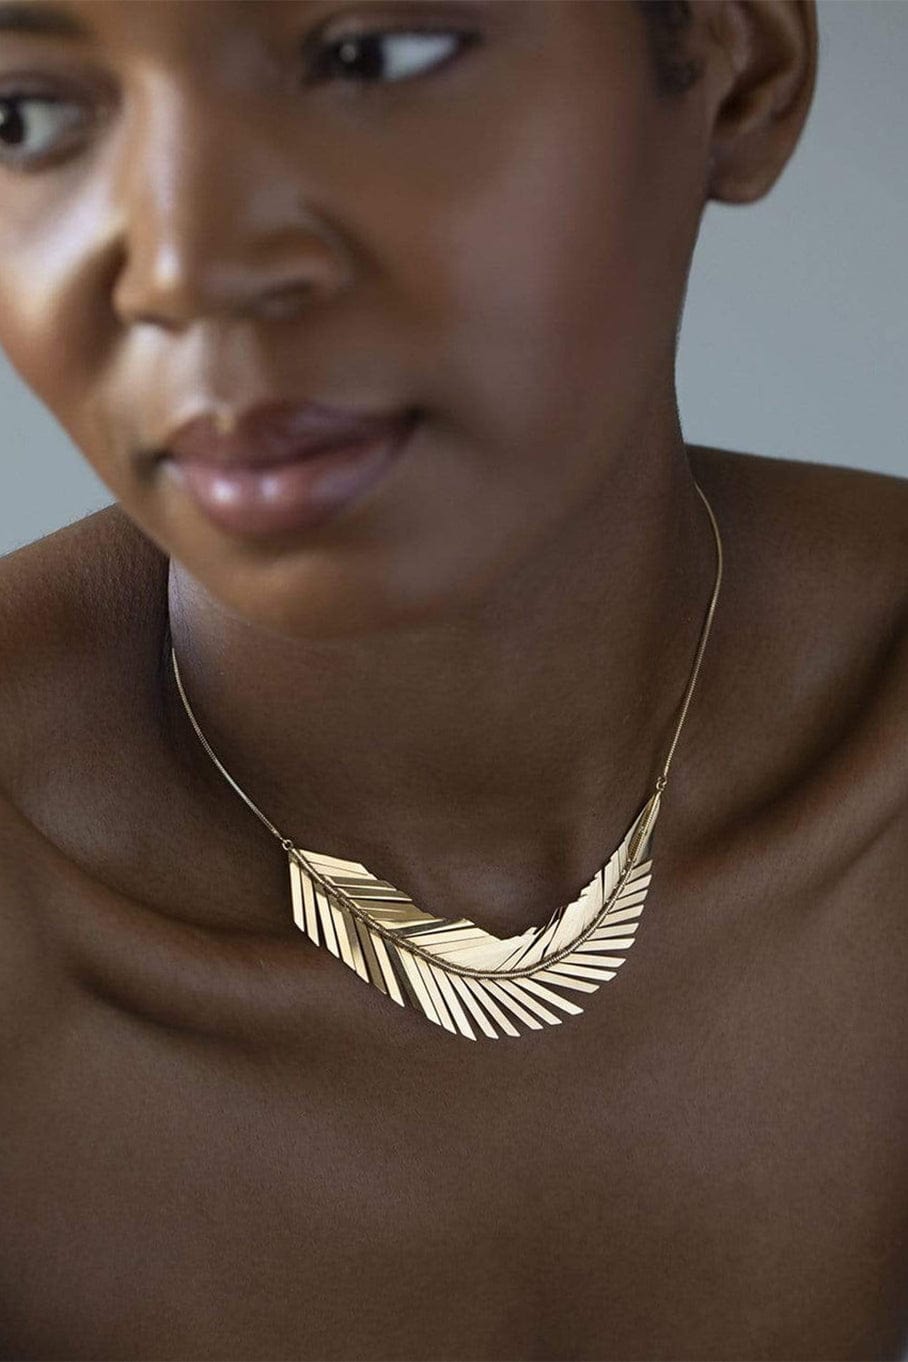 CADAR-Feather Necklace-YELLOW GOLD